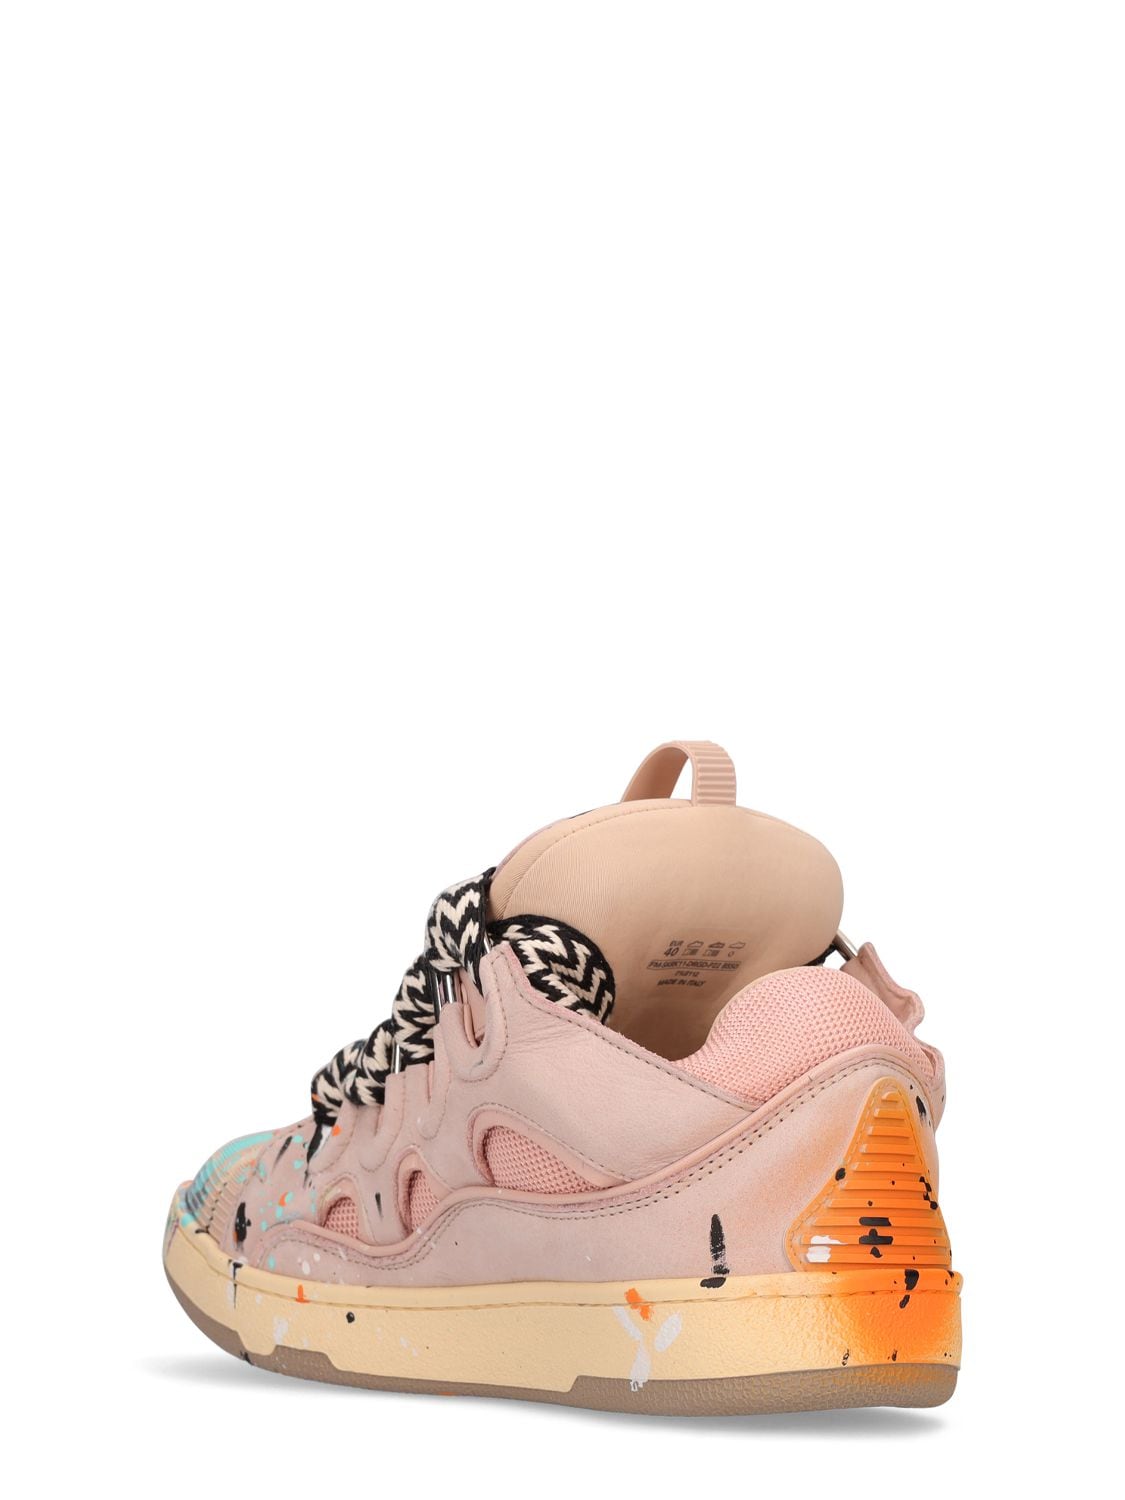 GALLERY DEPT X LANVIN Painted Leather Curb Sneakers | Smart Closet